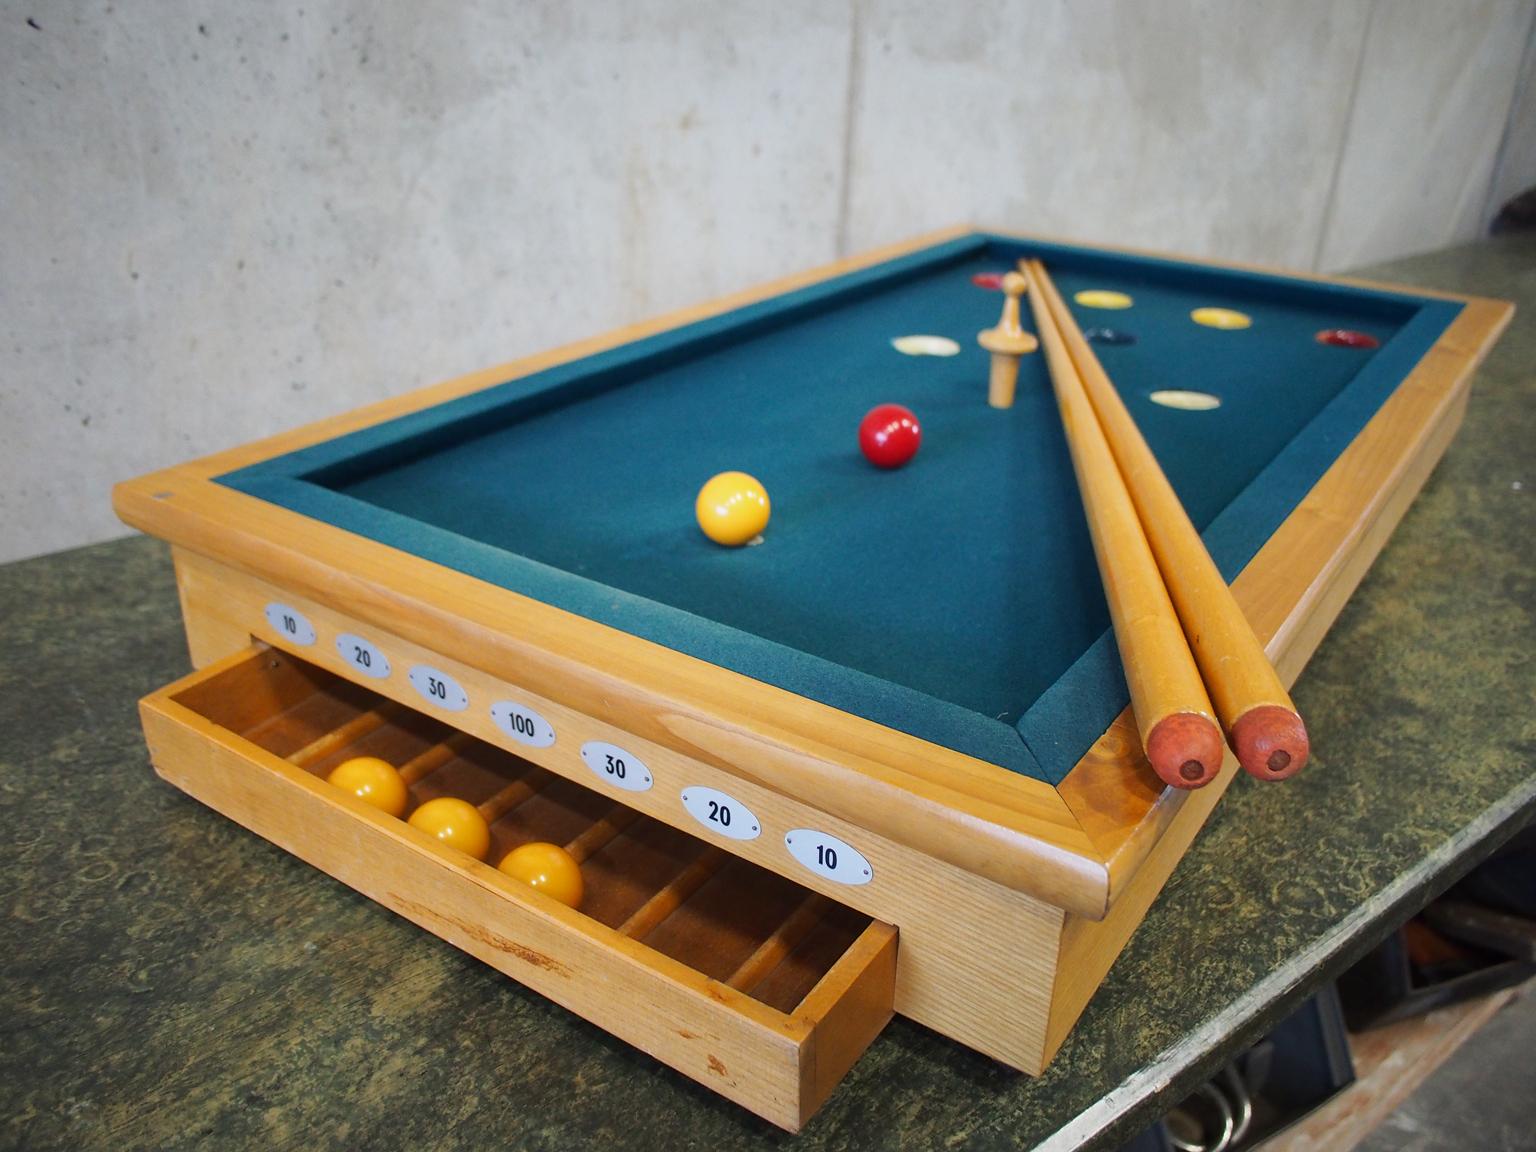 Chesterfield Small Table Poolgame with 2 Billiard Cues from the 1950s